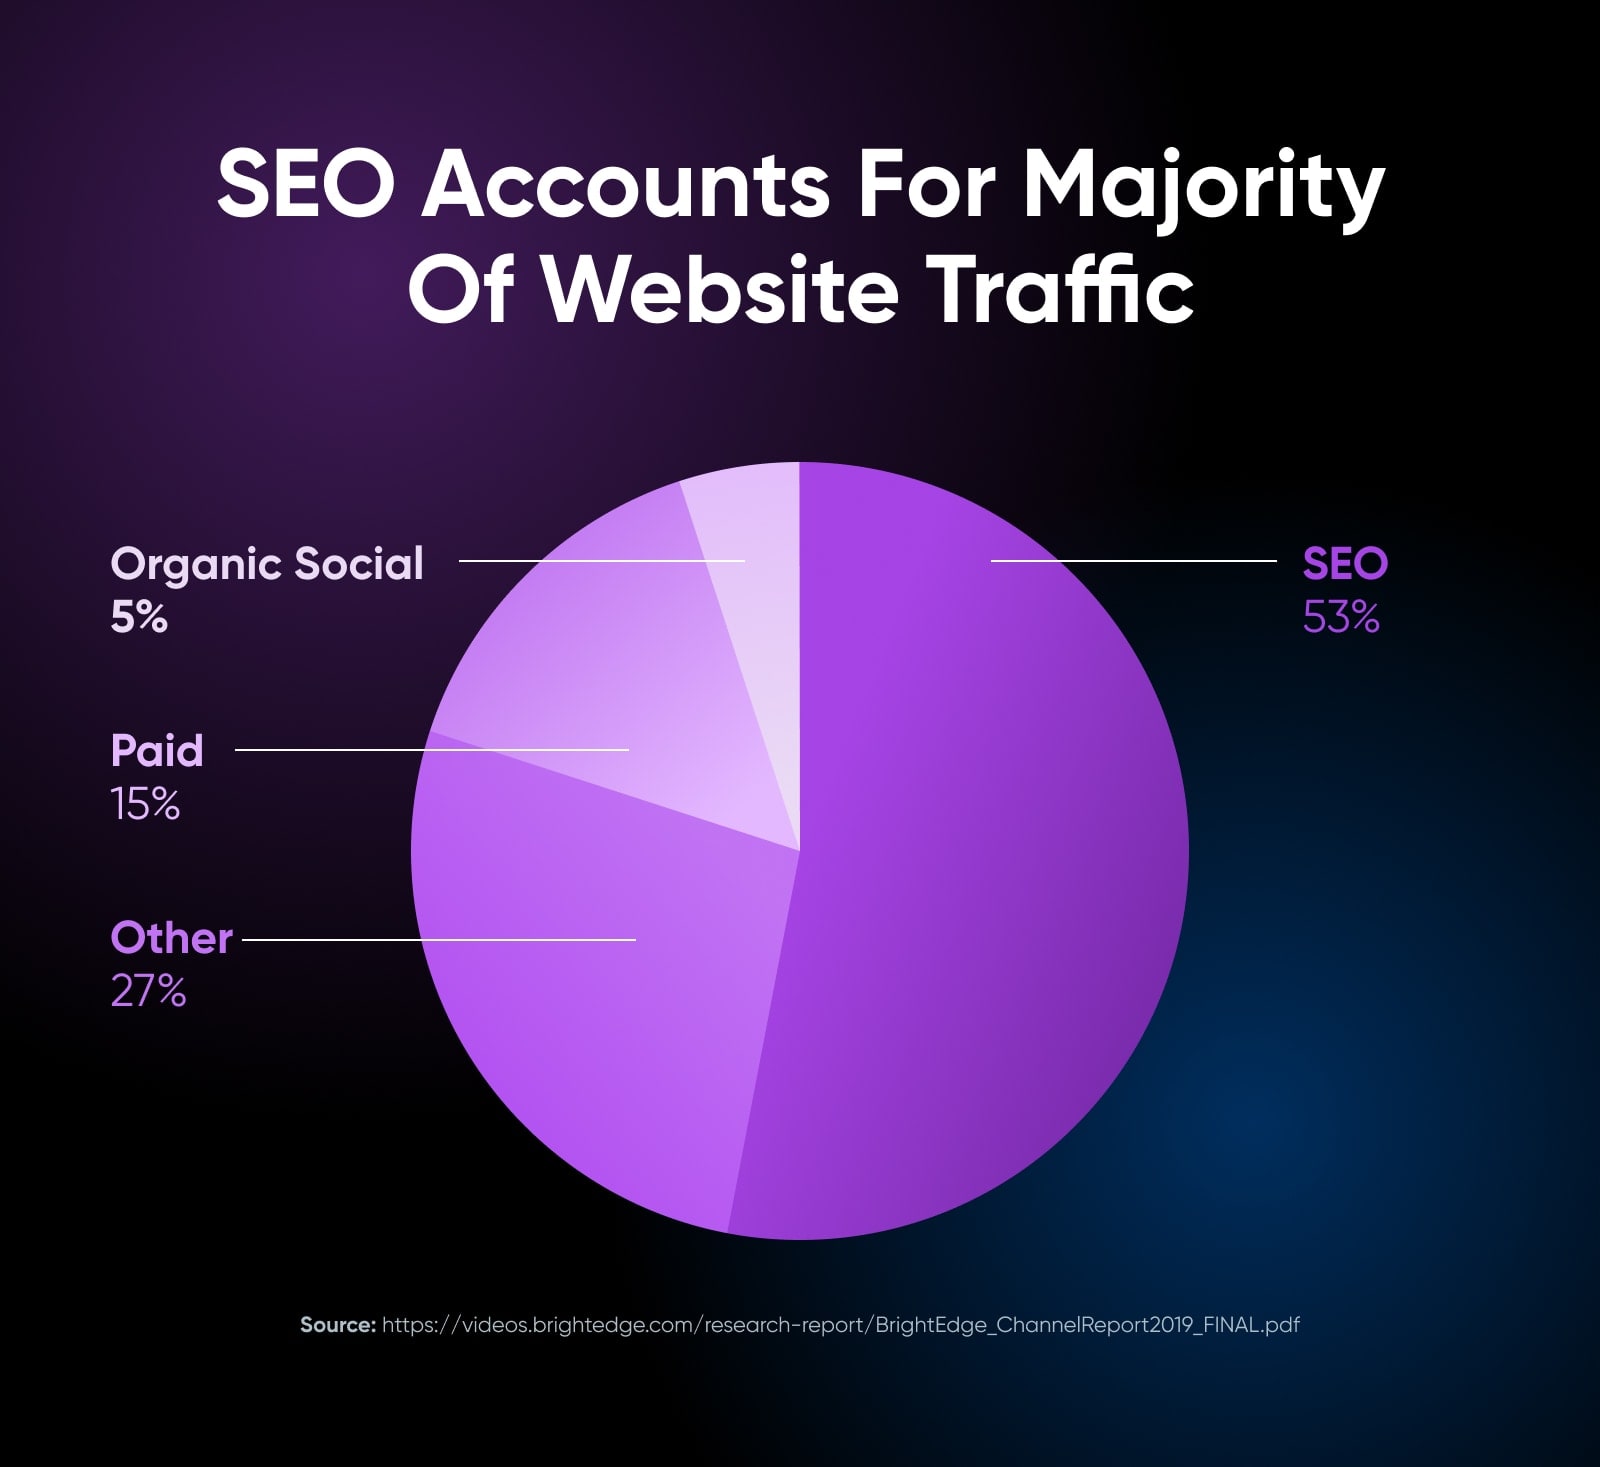 SEO accounts for the majority of website traffic with a pie chart showing SEO at 53% with other closet behind by 27%